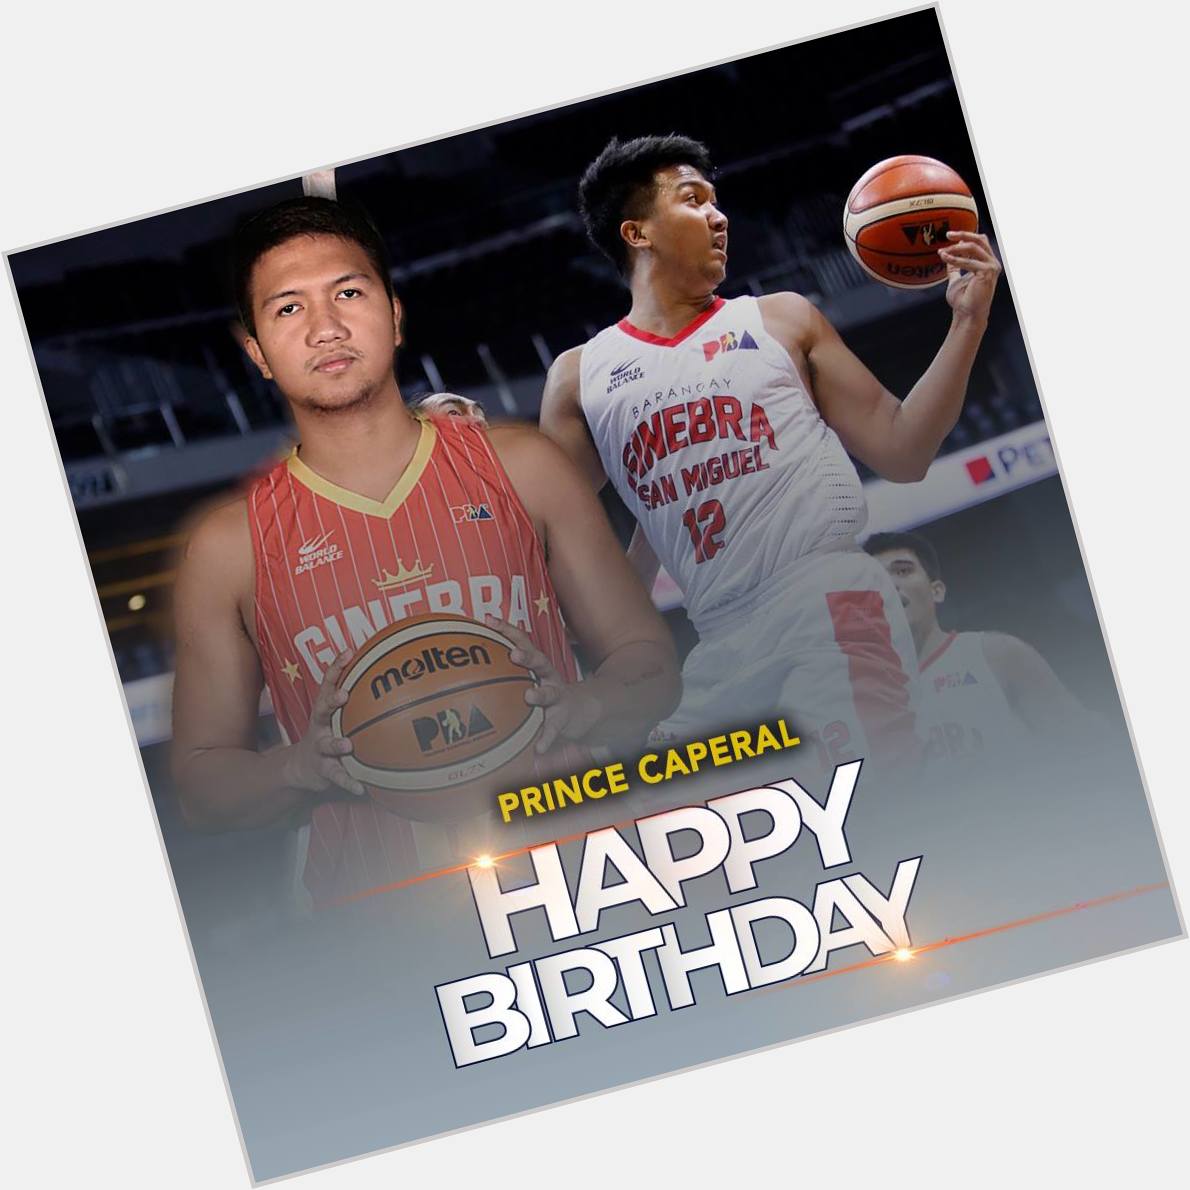 Happy 25th birthday to Prince Caperal! 